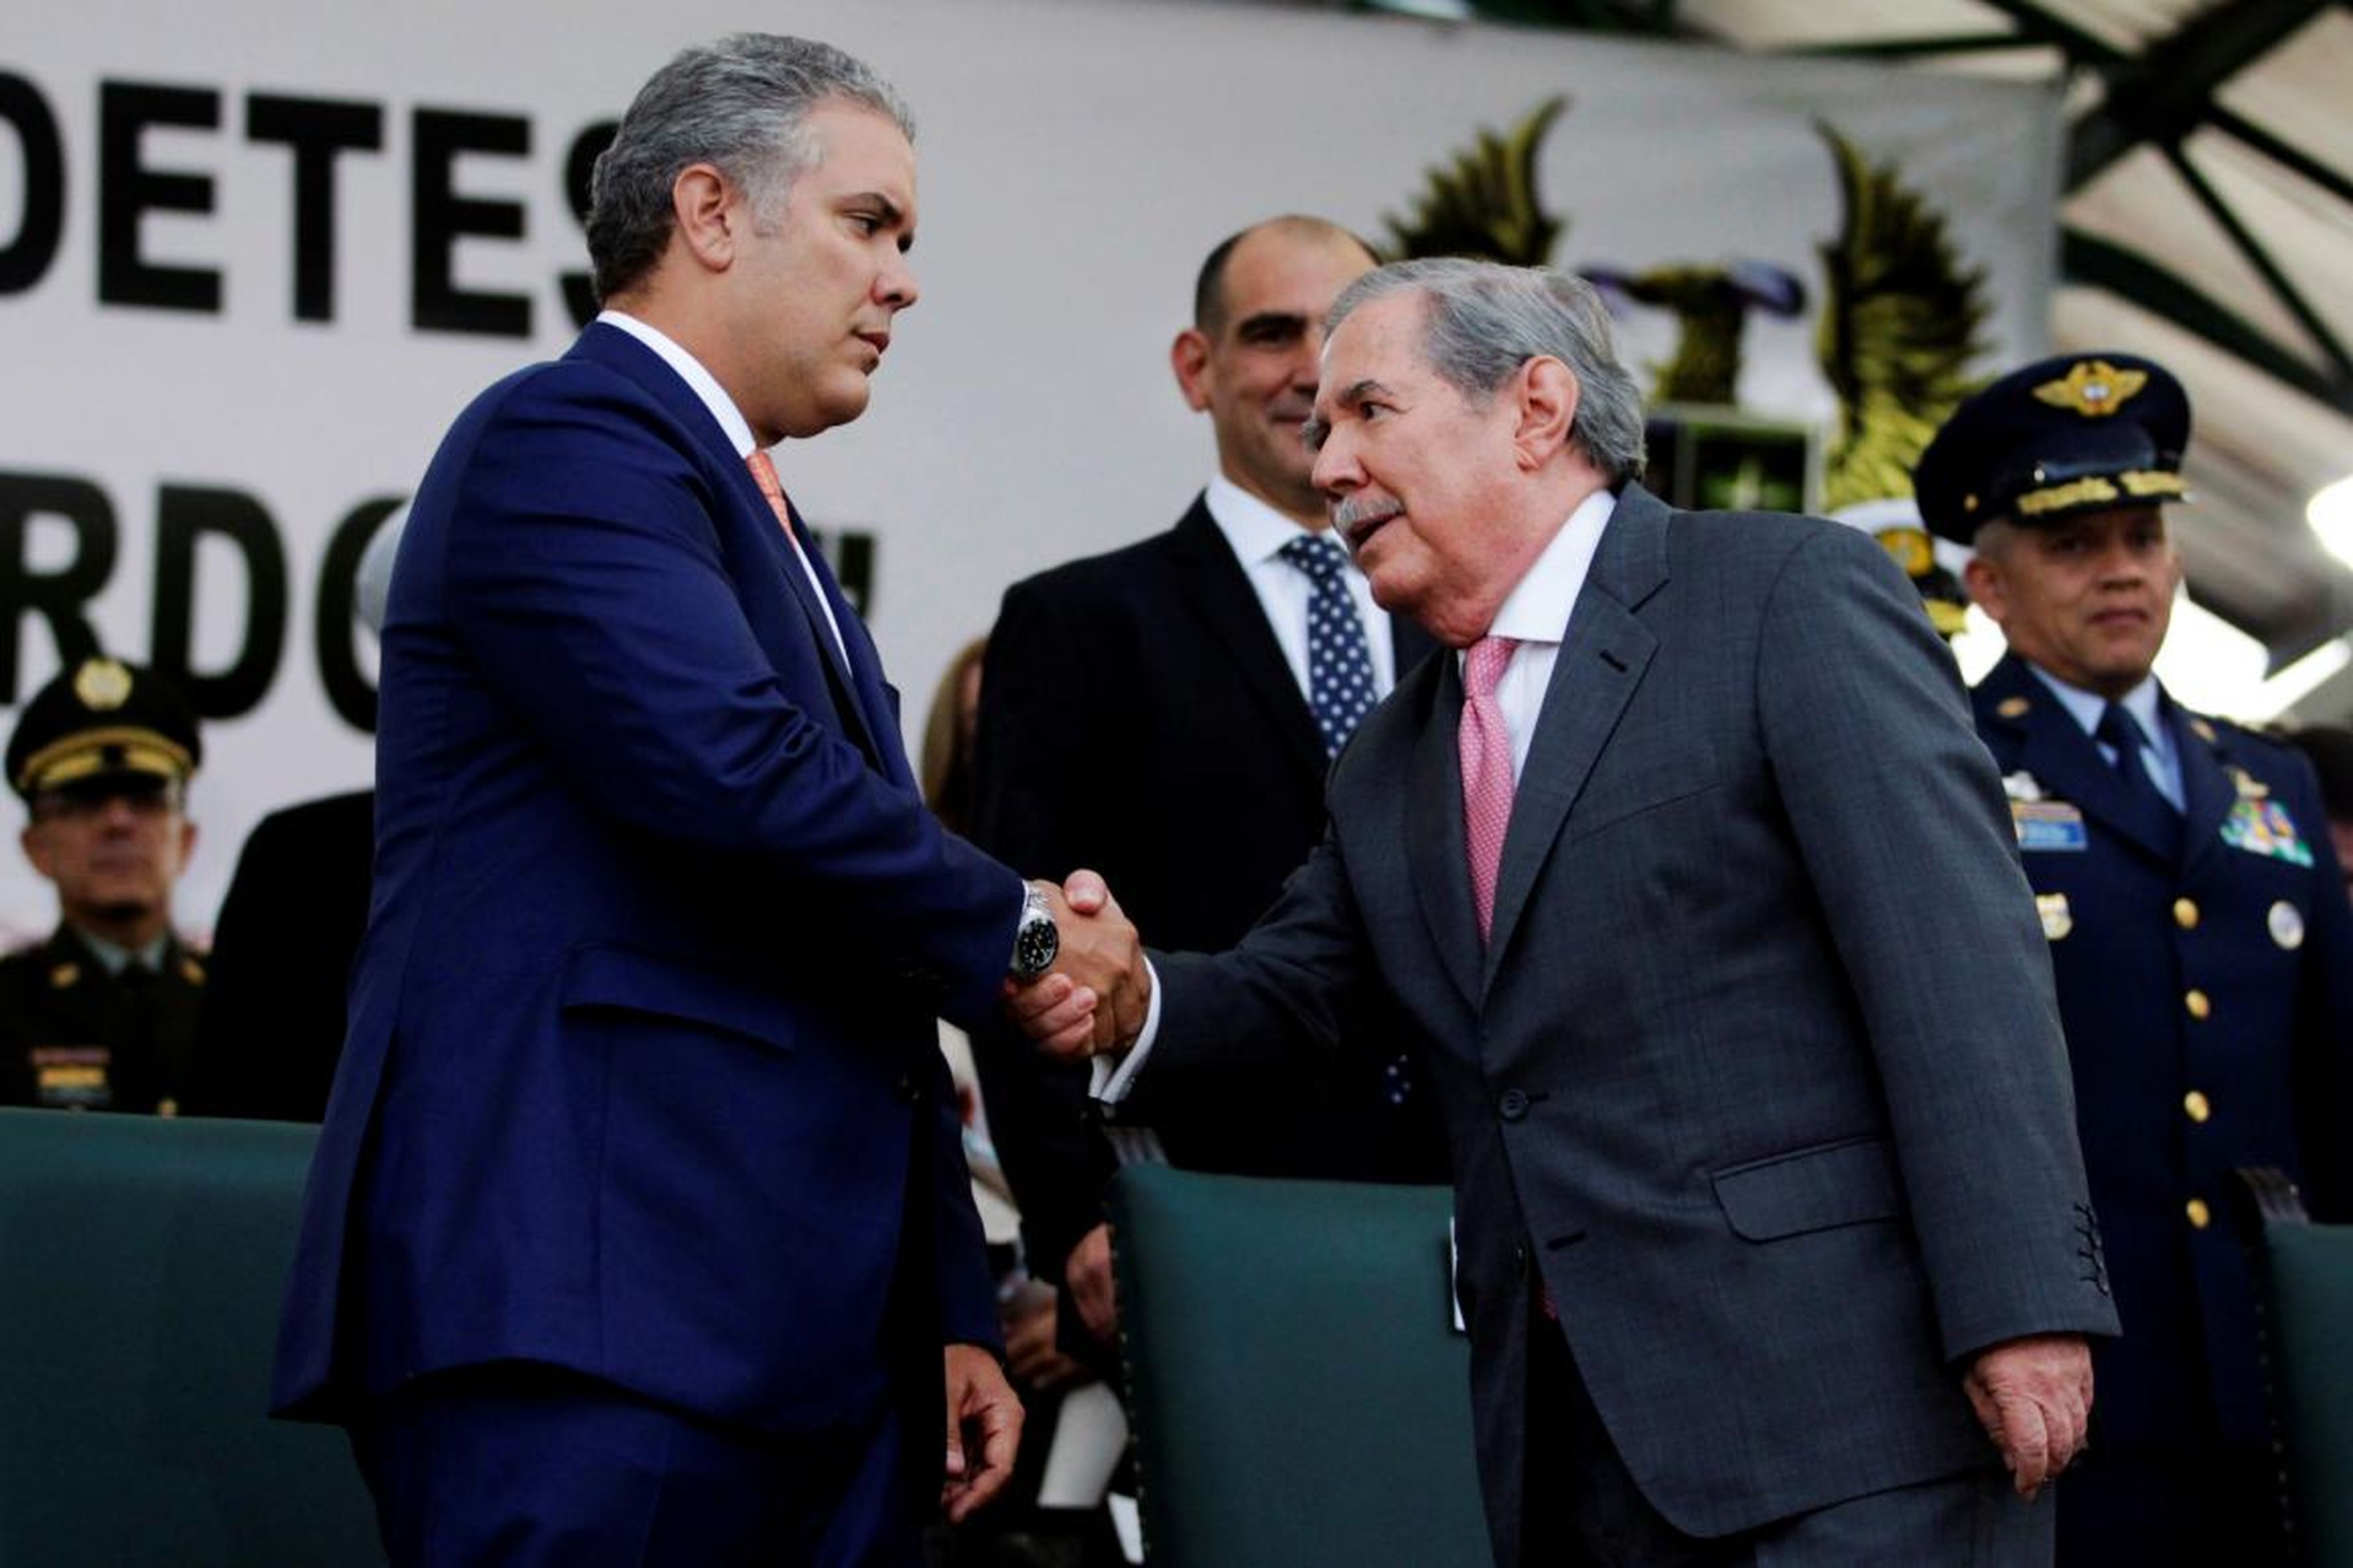 Colombian President Ivan Duque and Defense Minister Guillermo Botero shake hands on August 14, 2018.